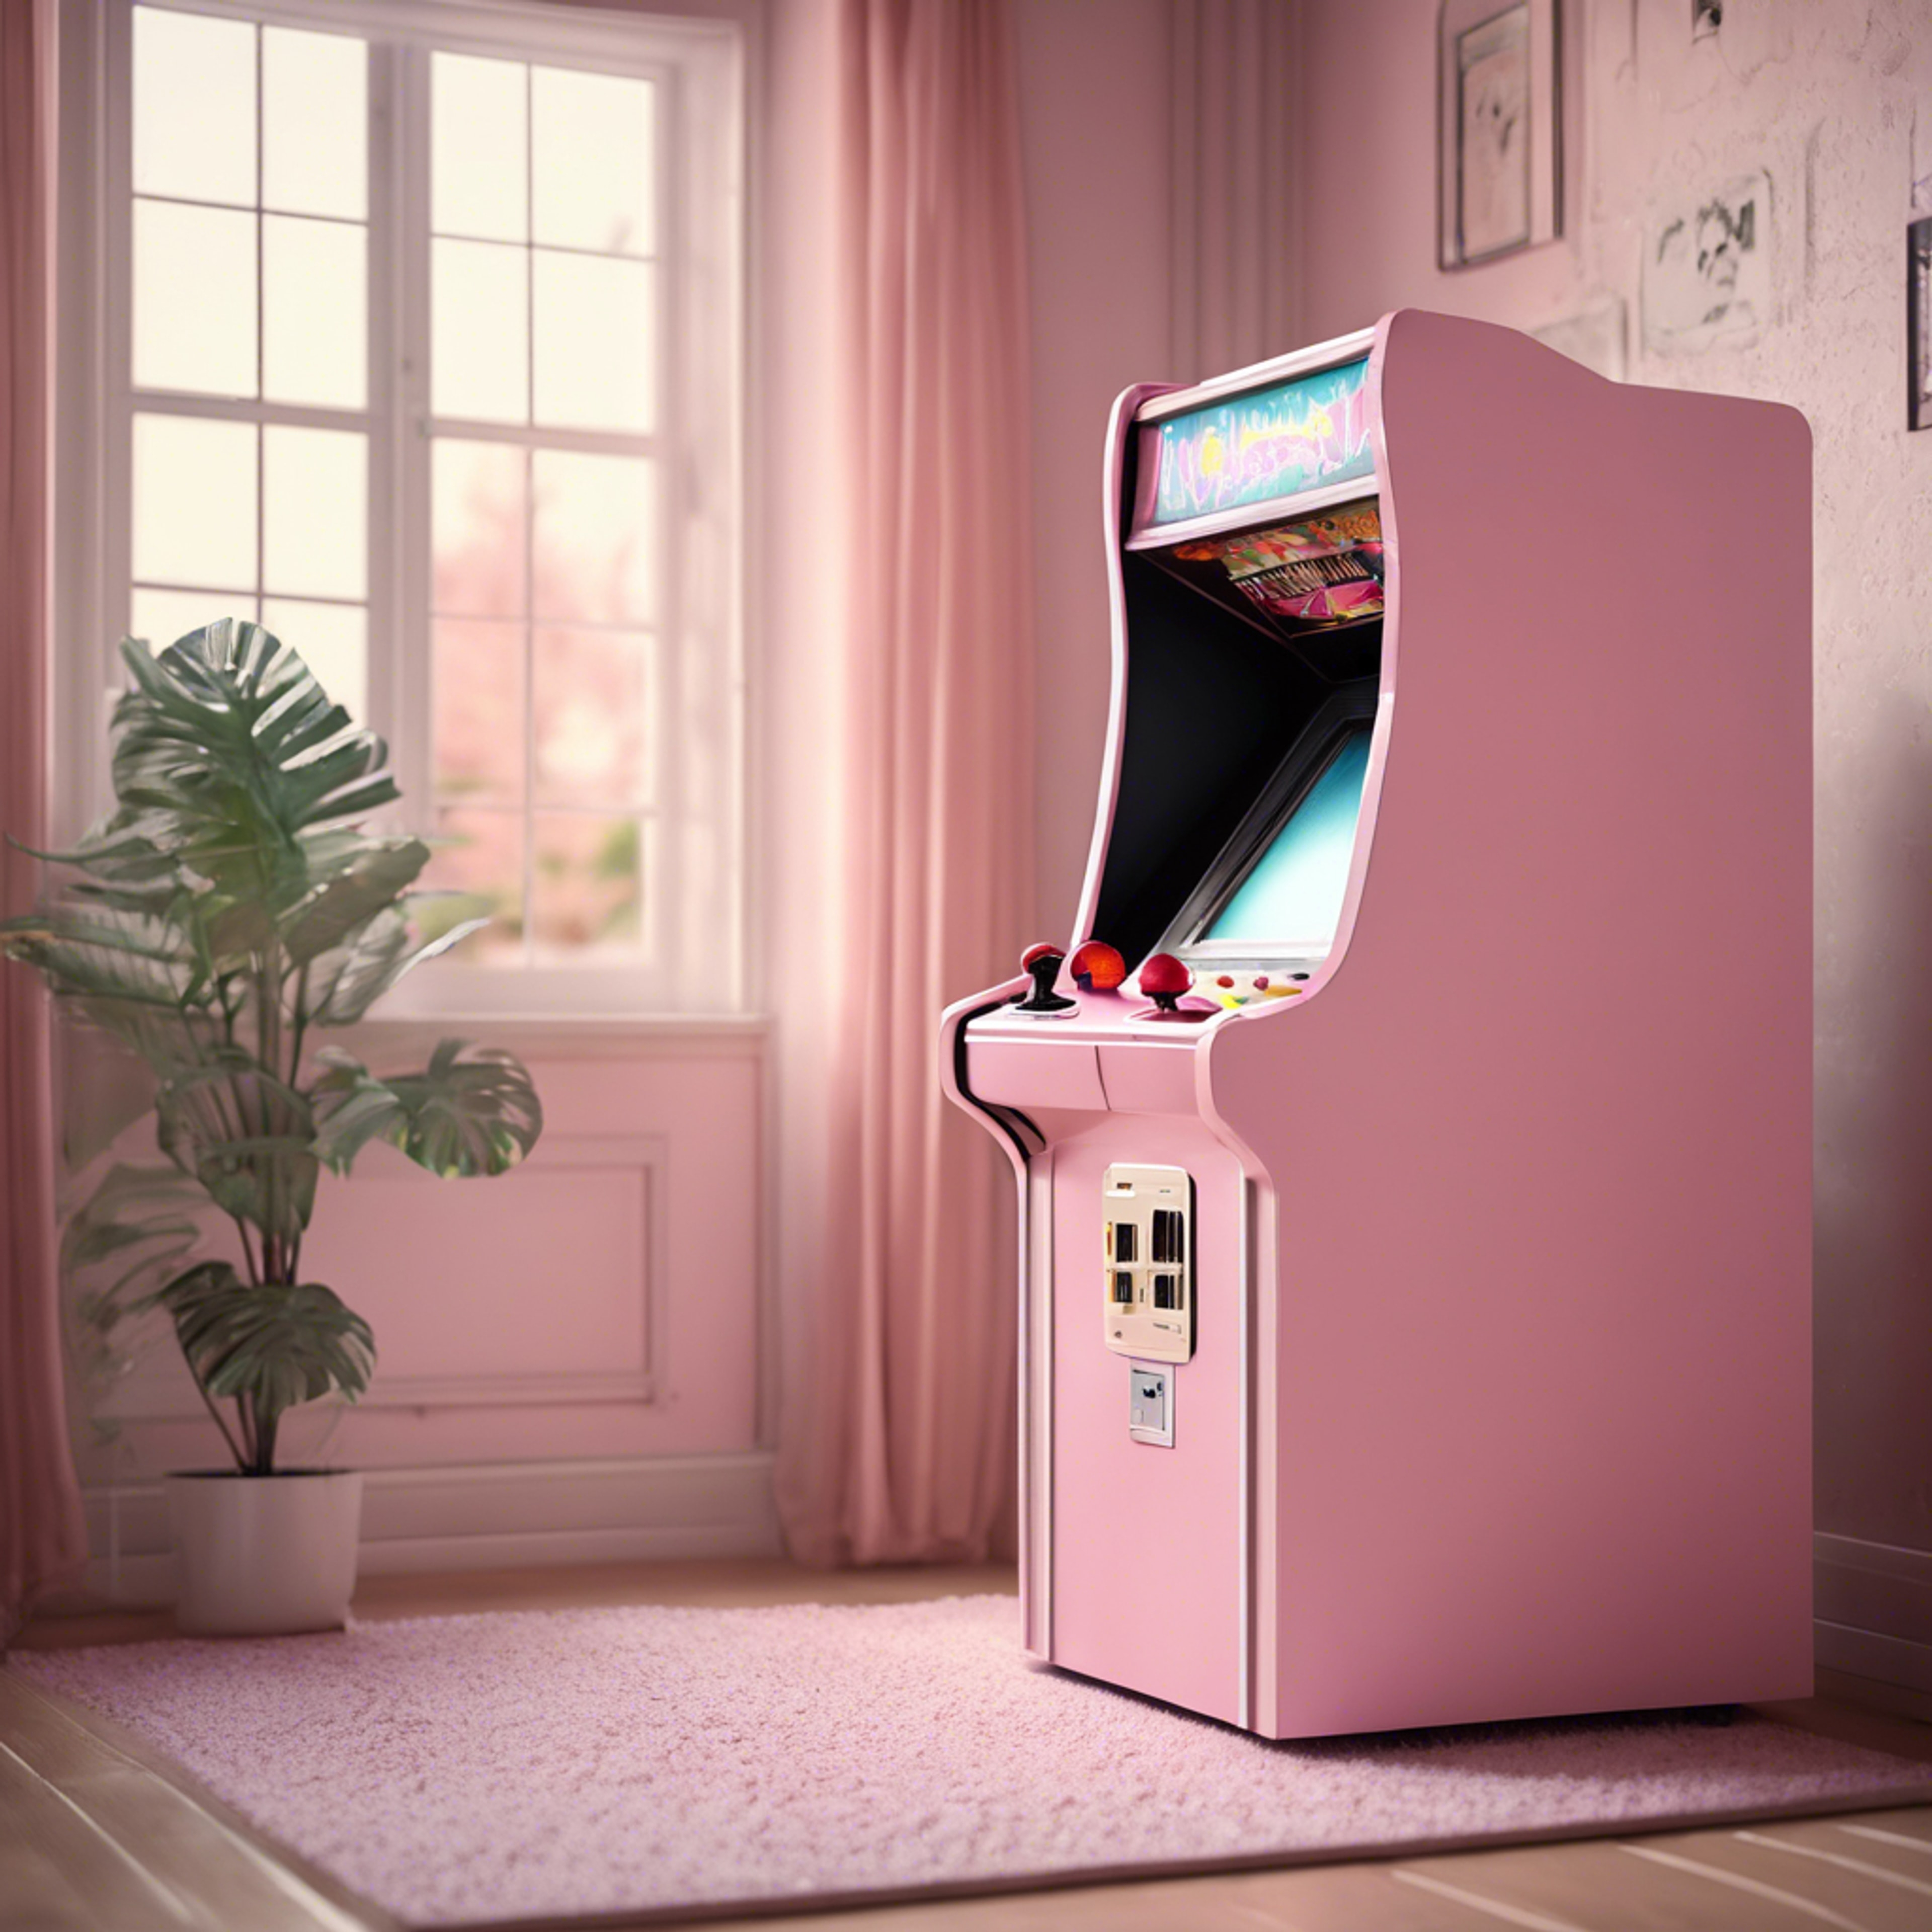 A pastel pink retro arcade machine in a cute, feminine room during sunrise. Валлпапер[d6fdc55d66e84aad939c]